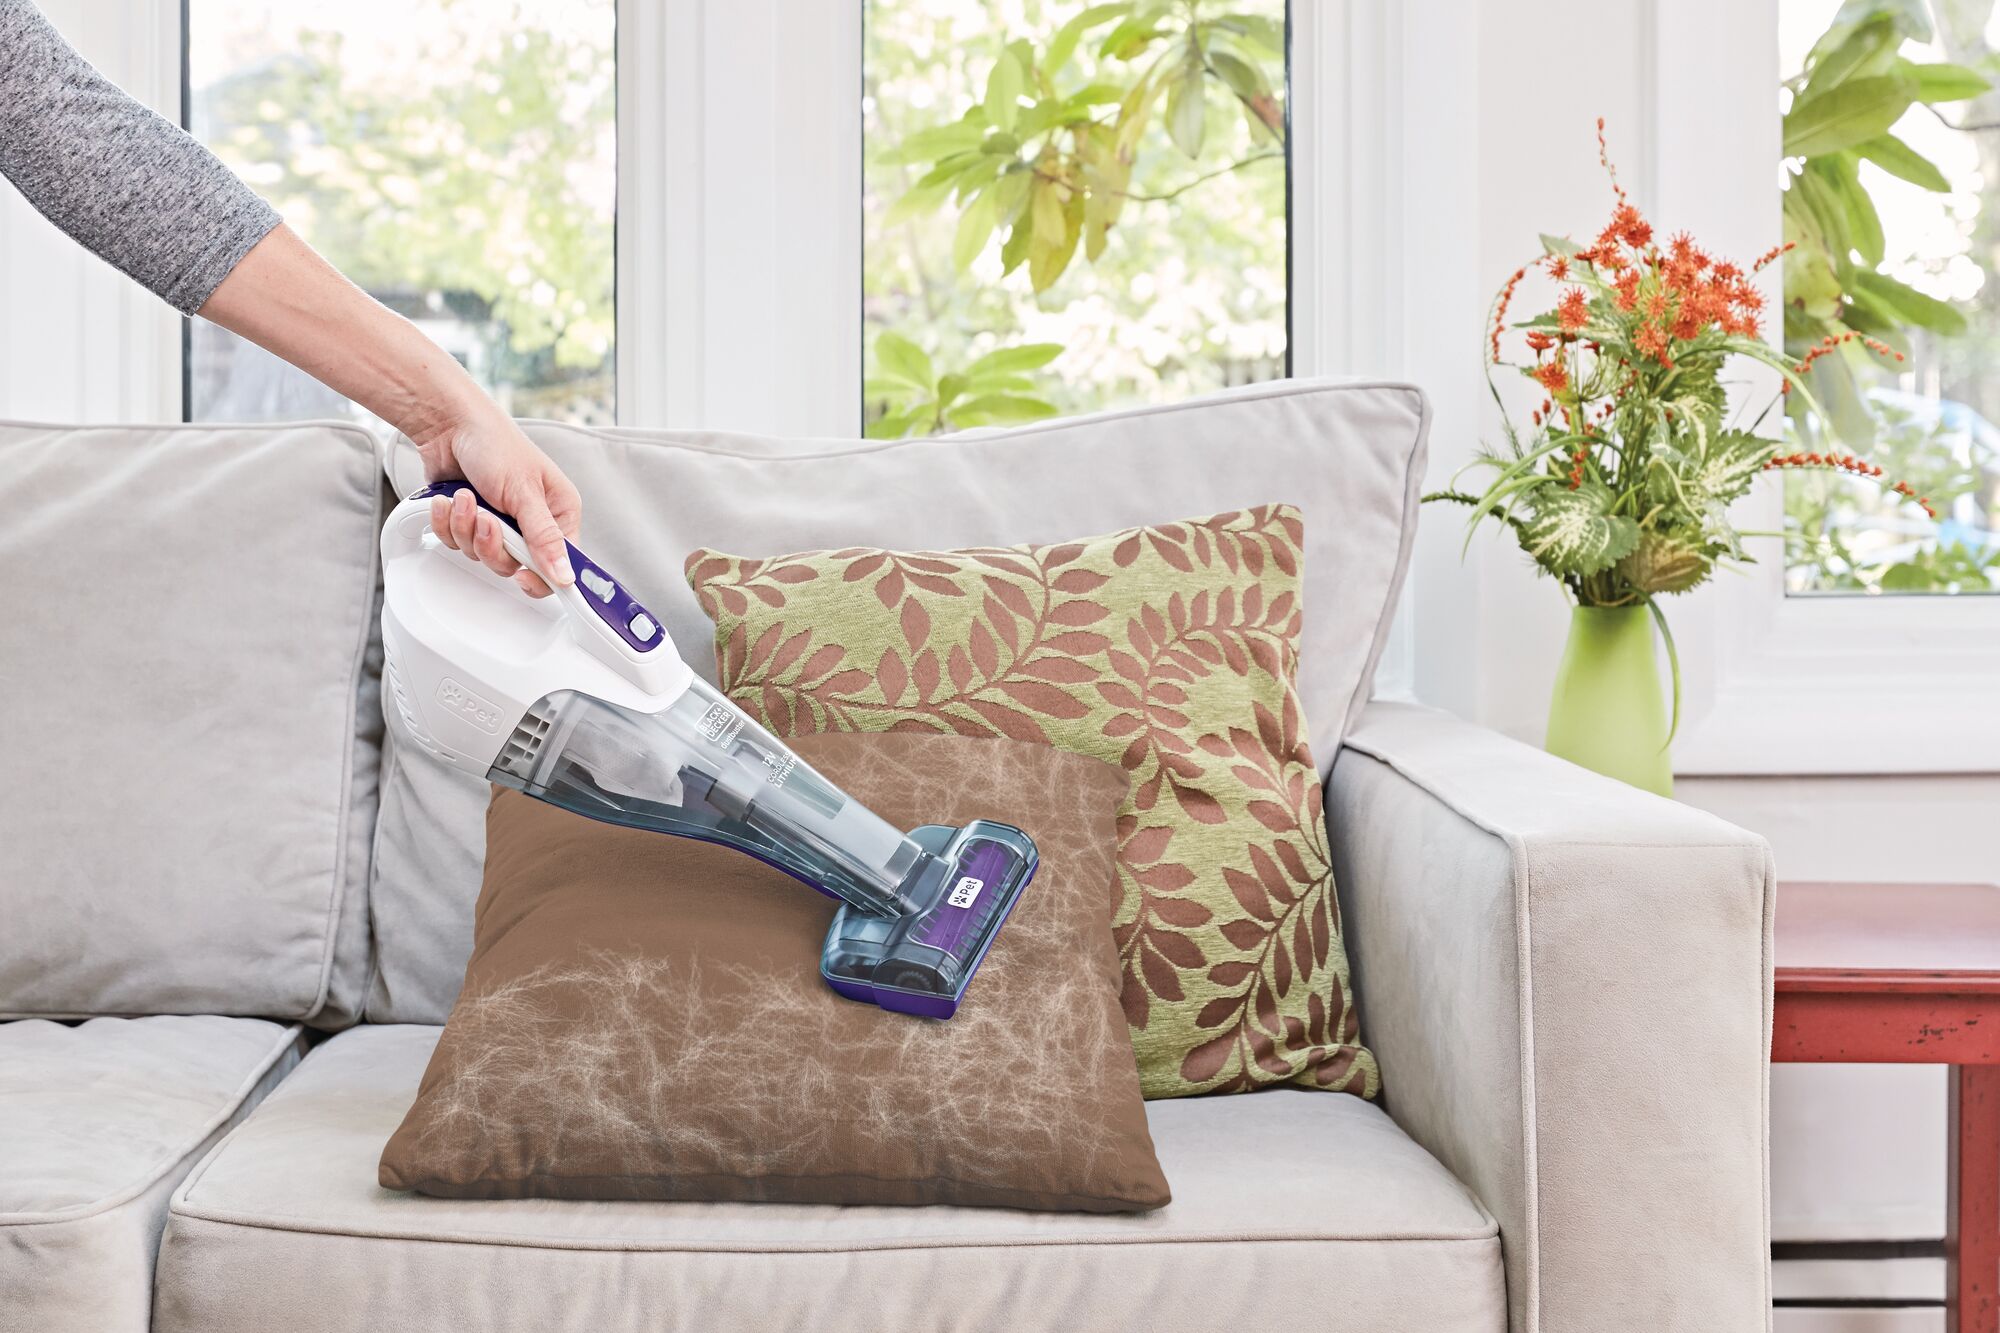 Profile of dustbuster quickclean cordless pet hand vacuum with motorized upholstery brush.